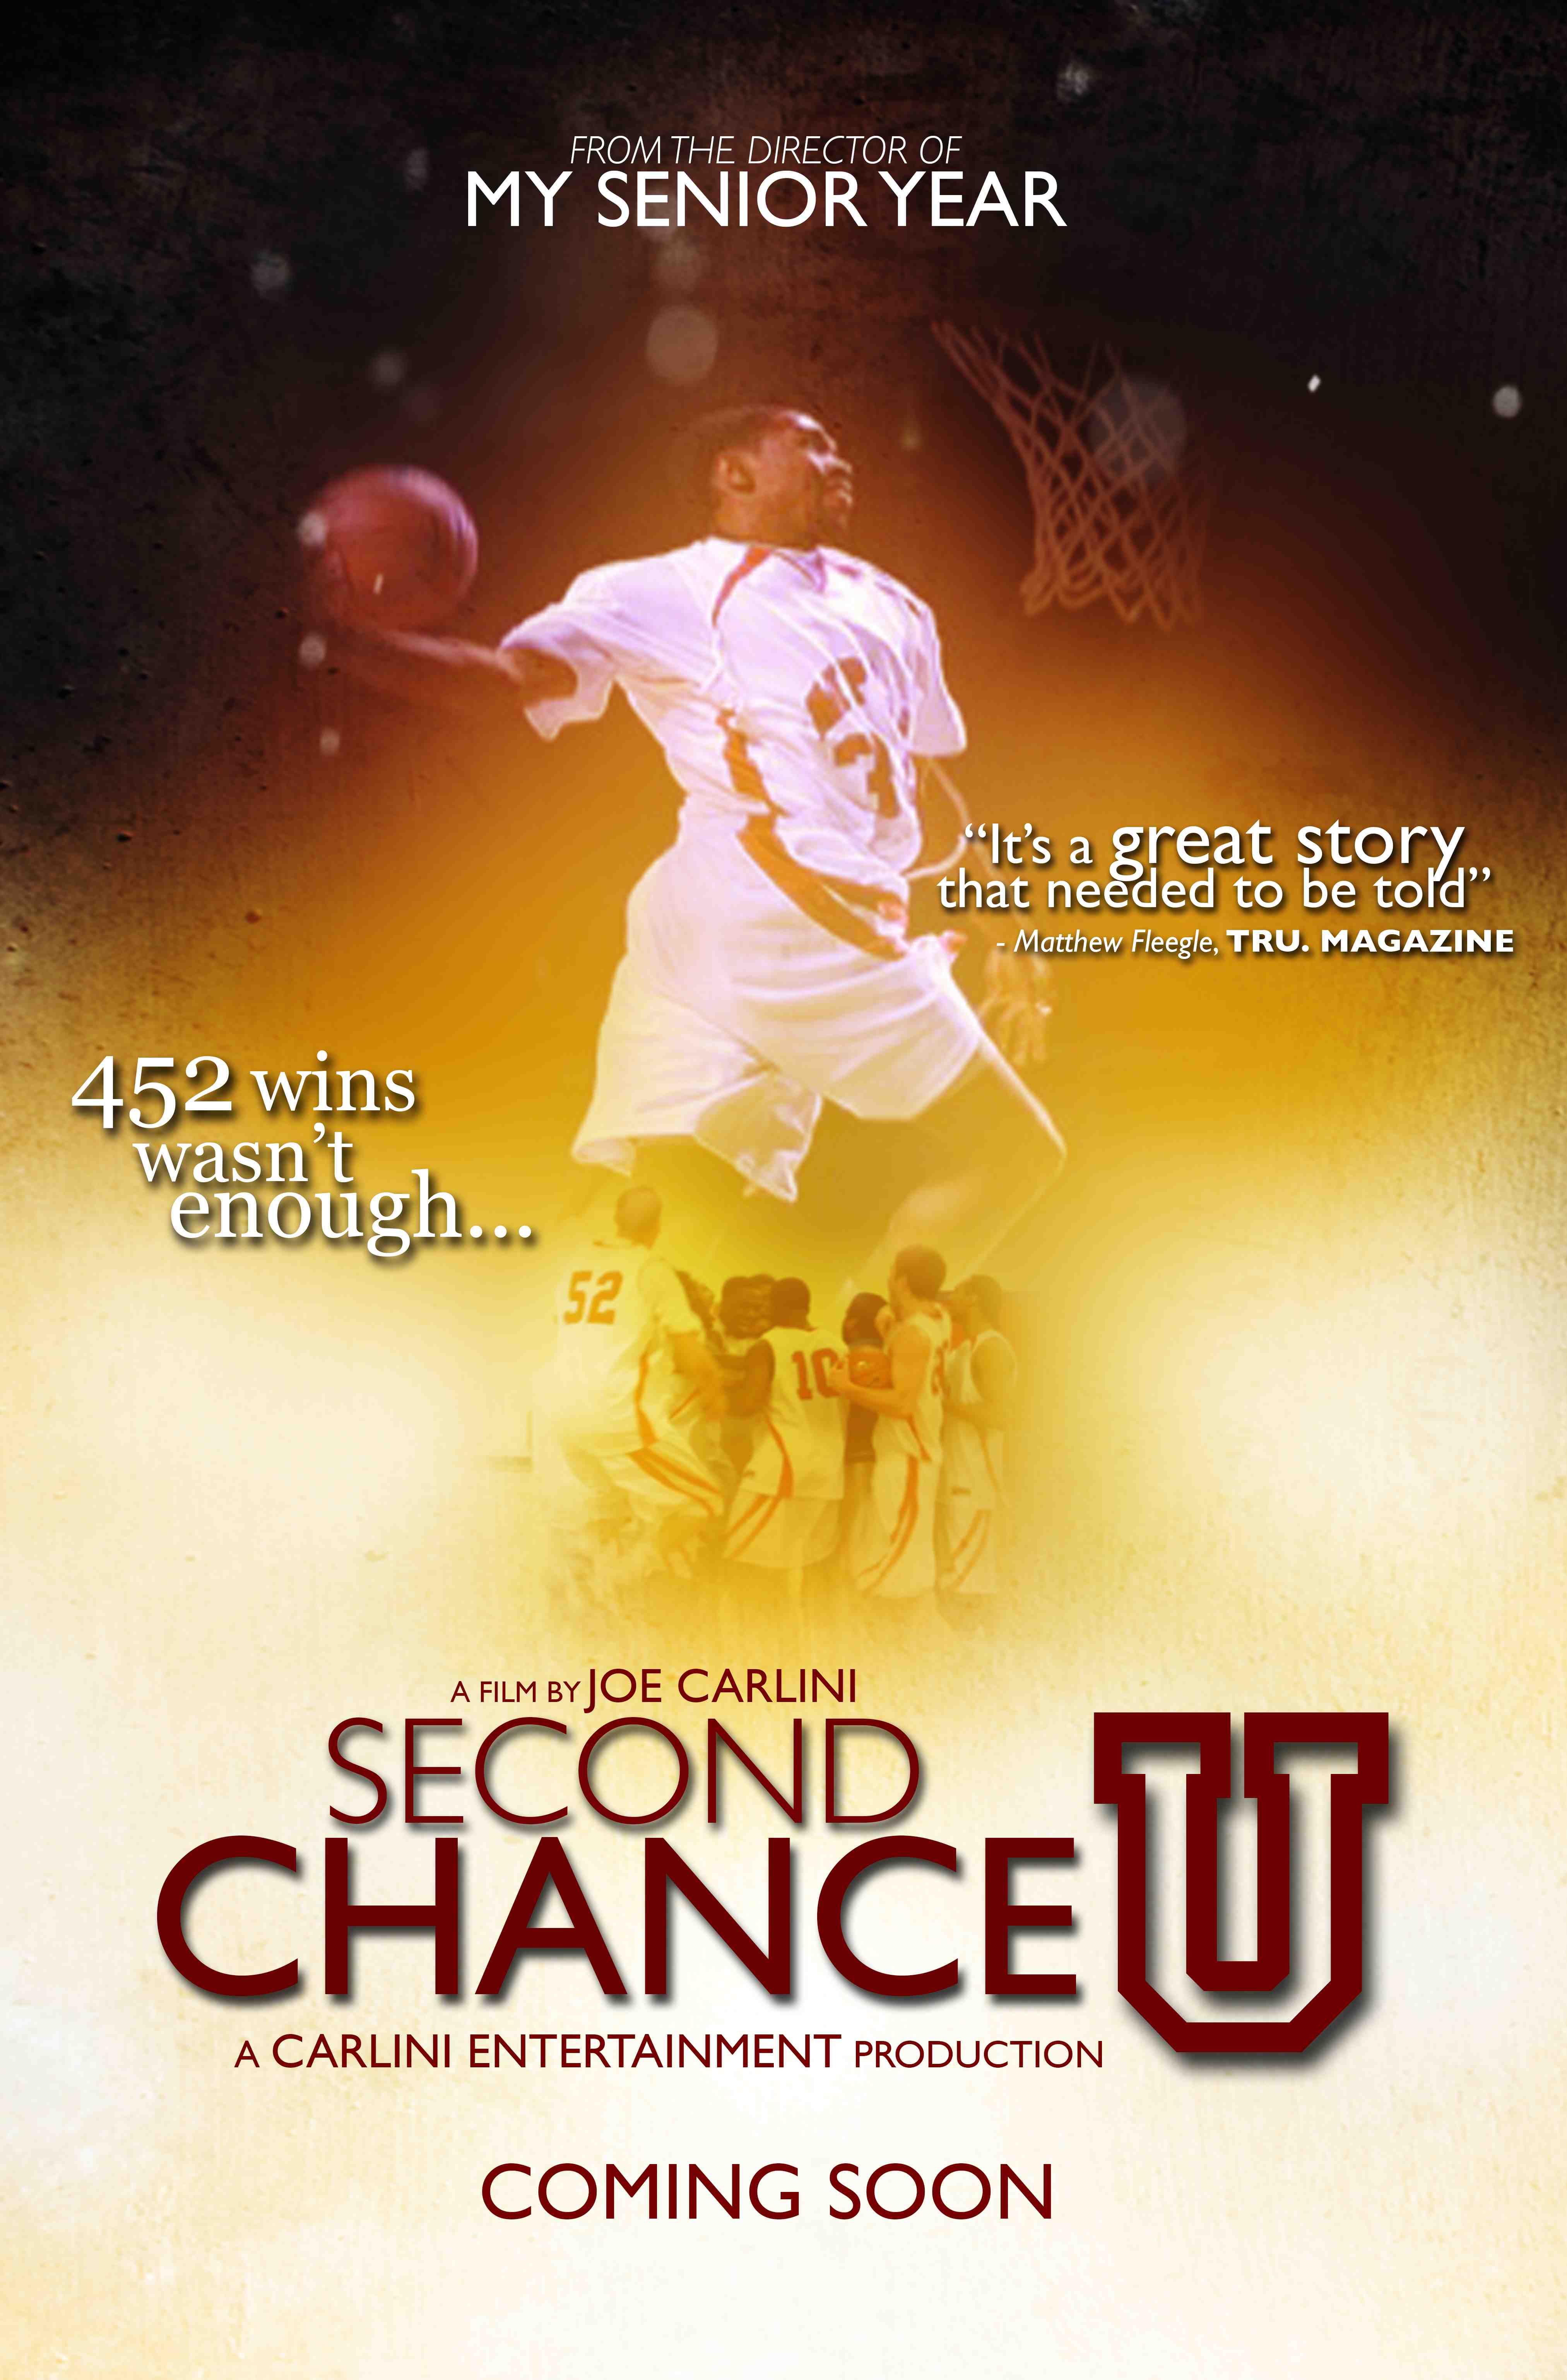 The Moive Poster to Second Chance U